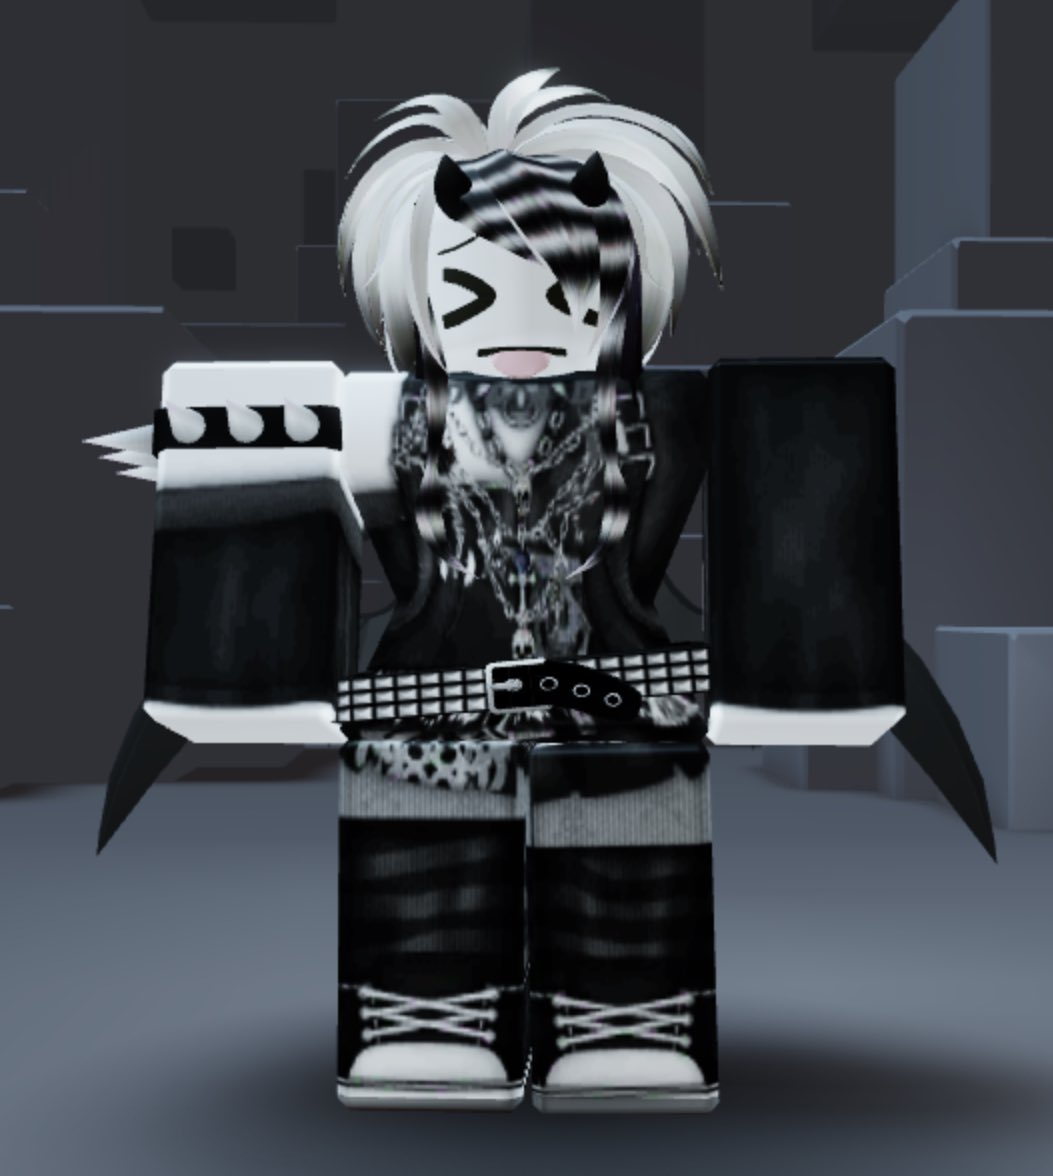 Avatar Outfits Emo/Goth - Roblox